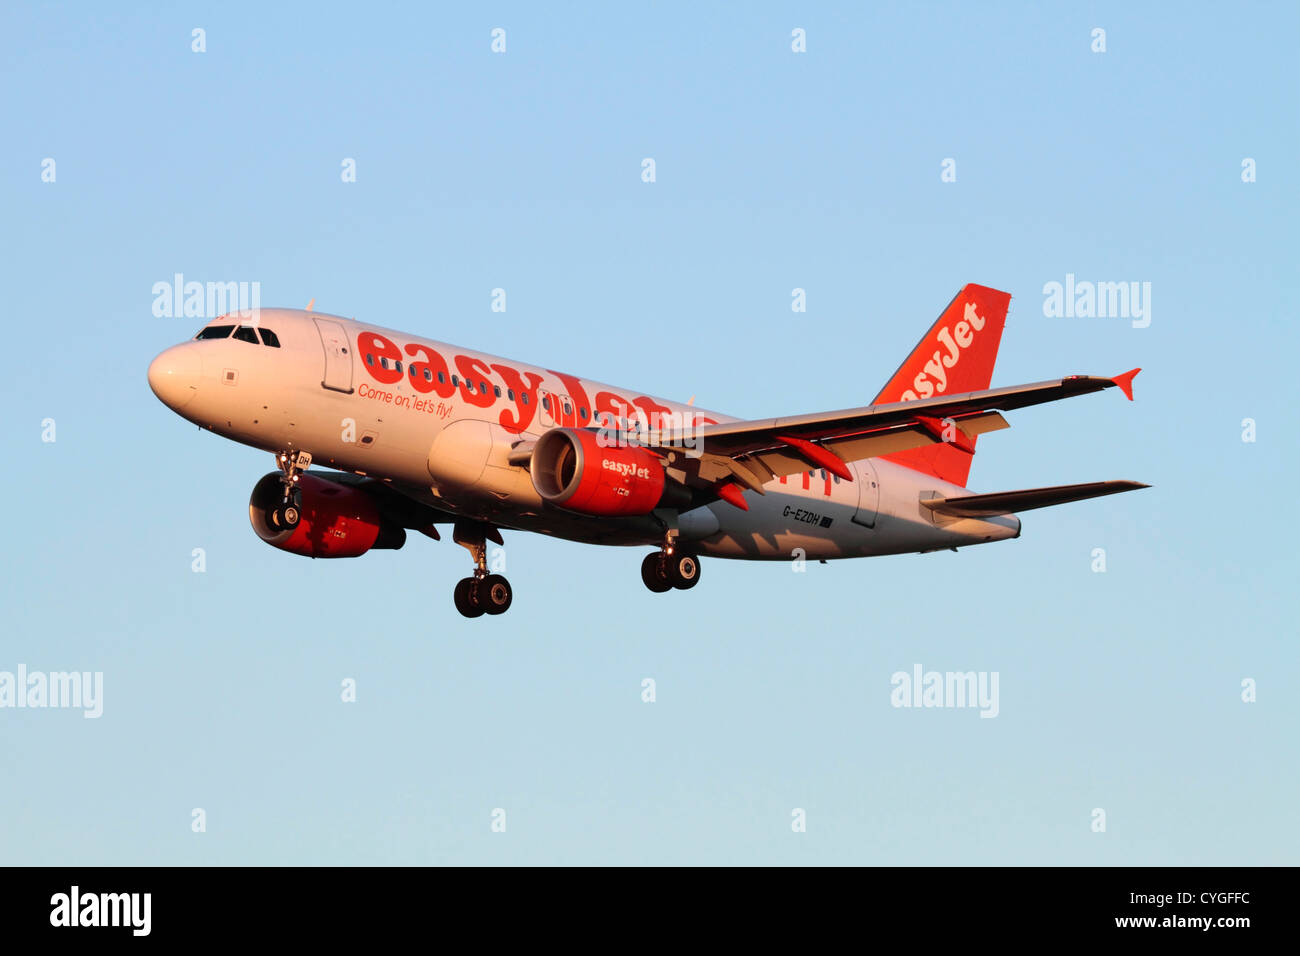 Cheap flights. Airbus A319 passenger jet belonging to low cost airline easyJet on approach at sunset Stock Photo